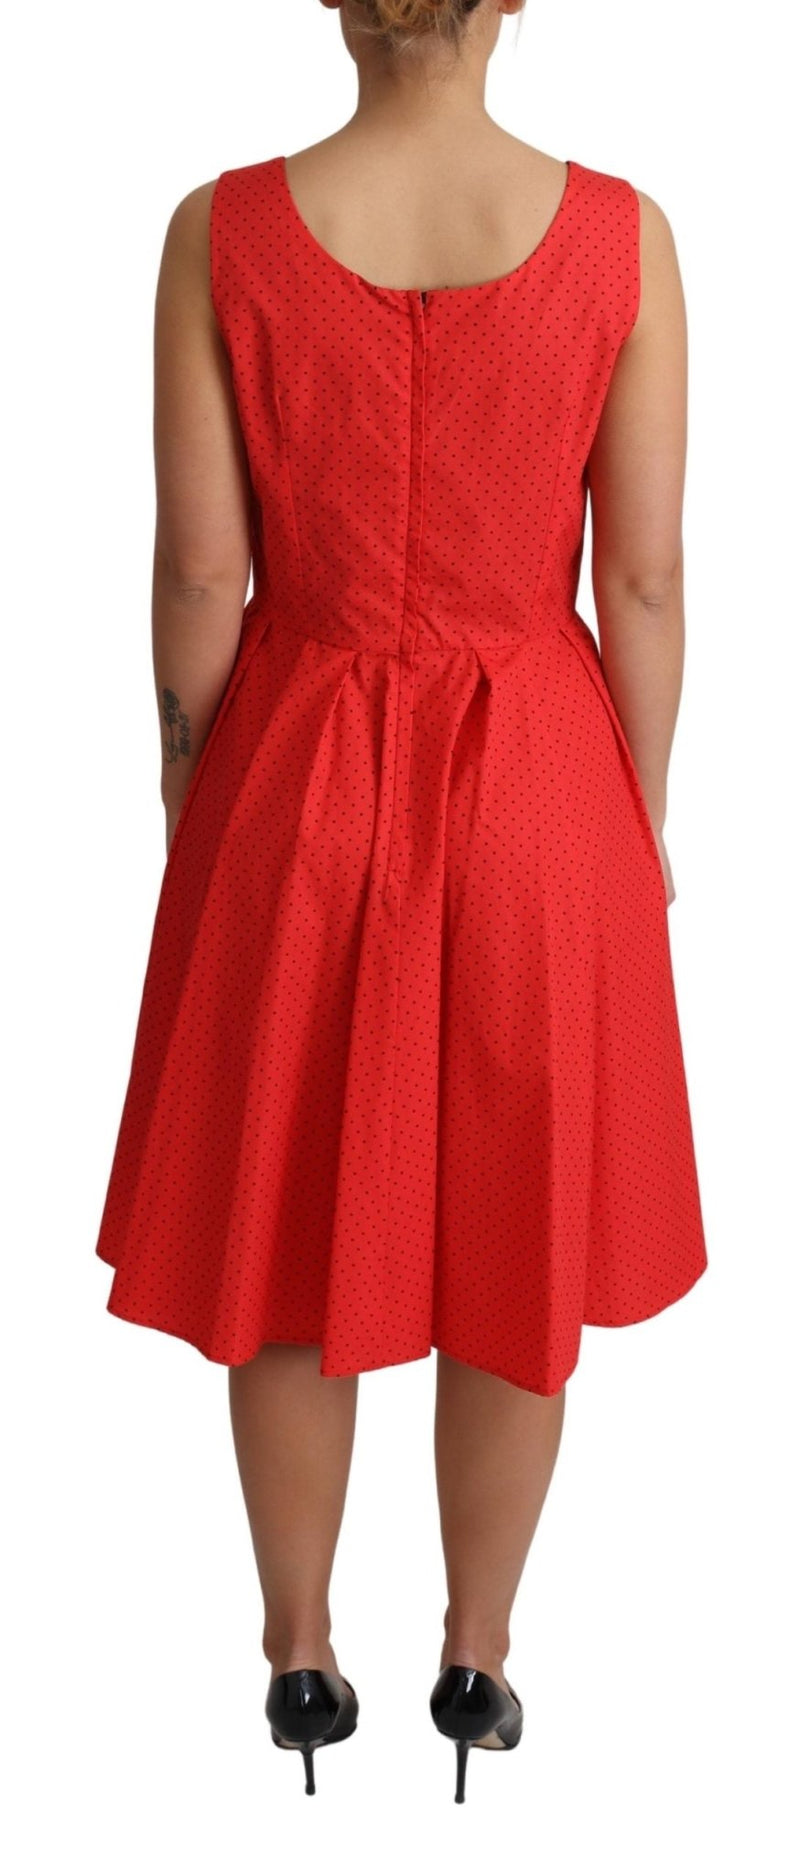 Red Polka Dotted Cotton A-Line Dress - Avaz Shop